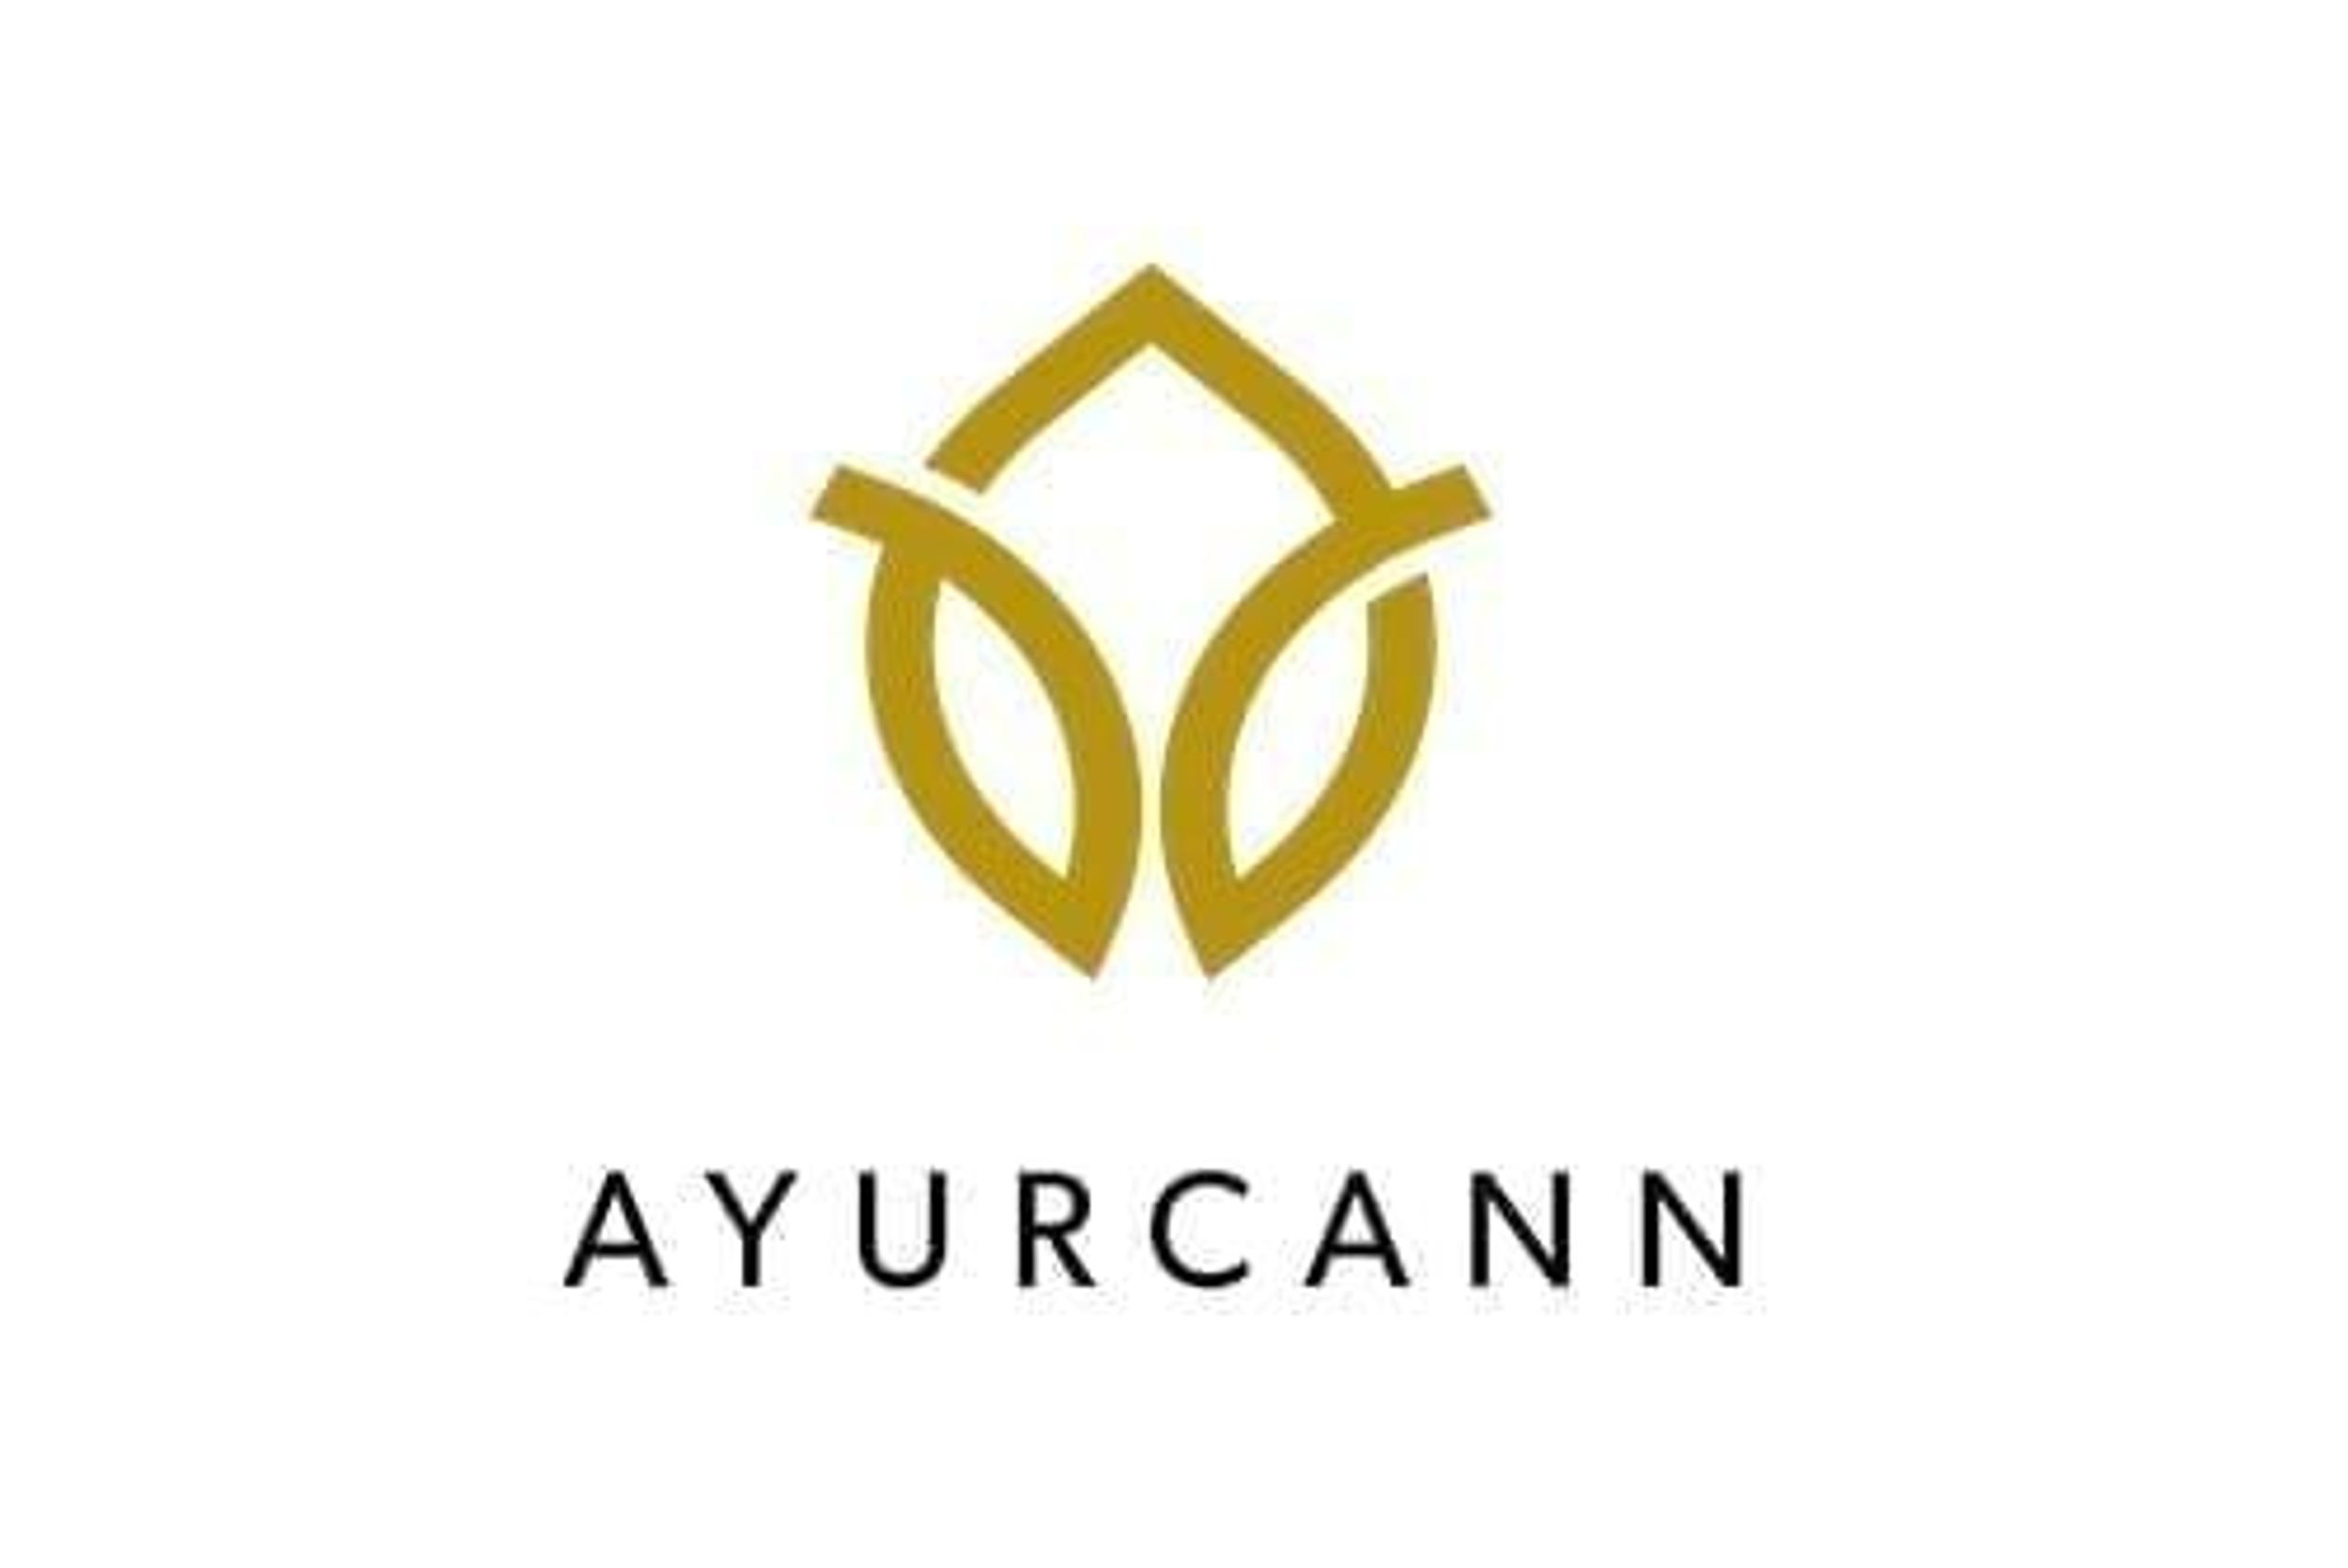 AYURCANN HOLDINGS CORP. ROLLES INTO 5th PROVINCE WITH BESTSELLING "FUEGO" VAPES IN ALBERTA AND ANNOUNCES SYMBOL CHANGE ON THE OTCQB MARKET